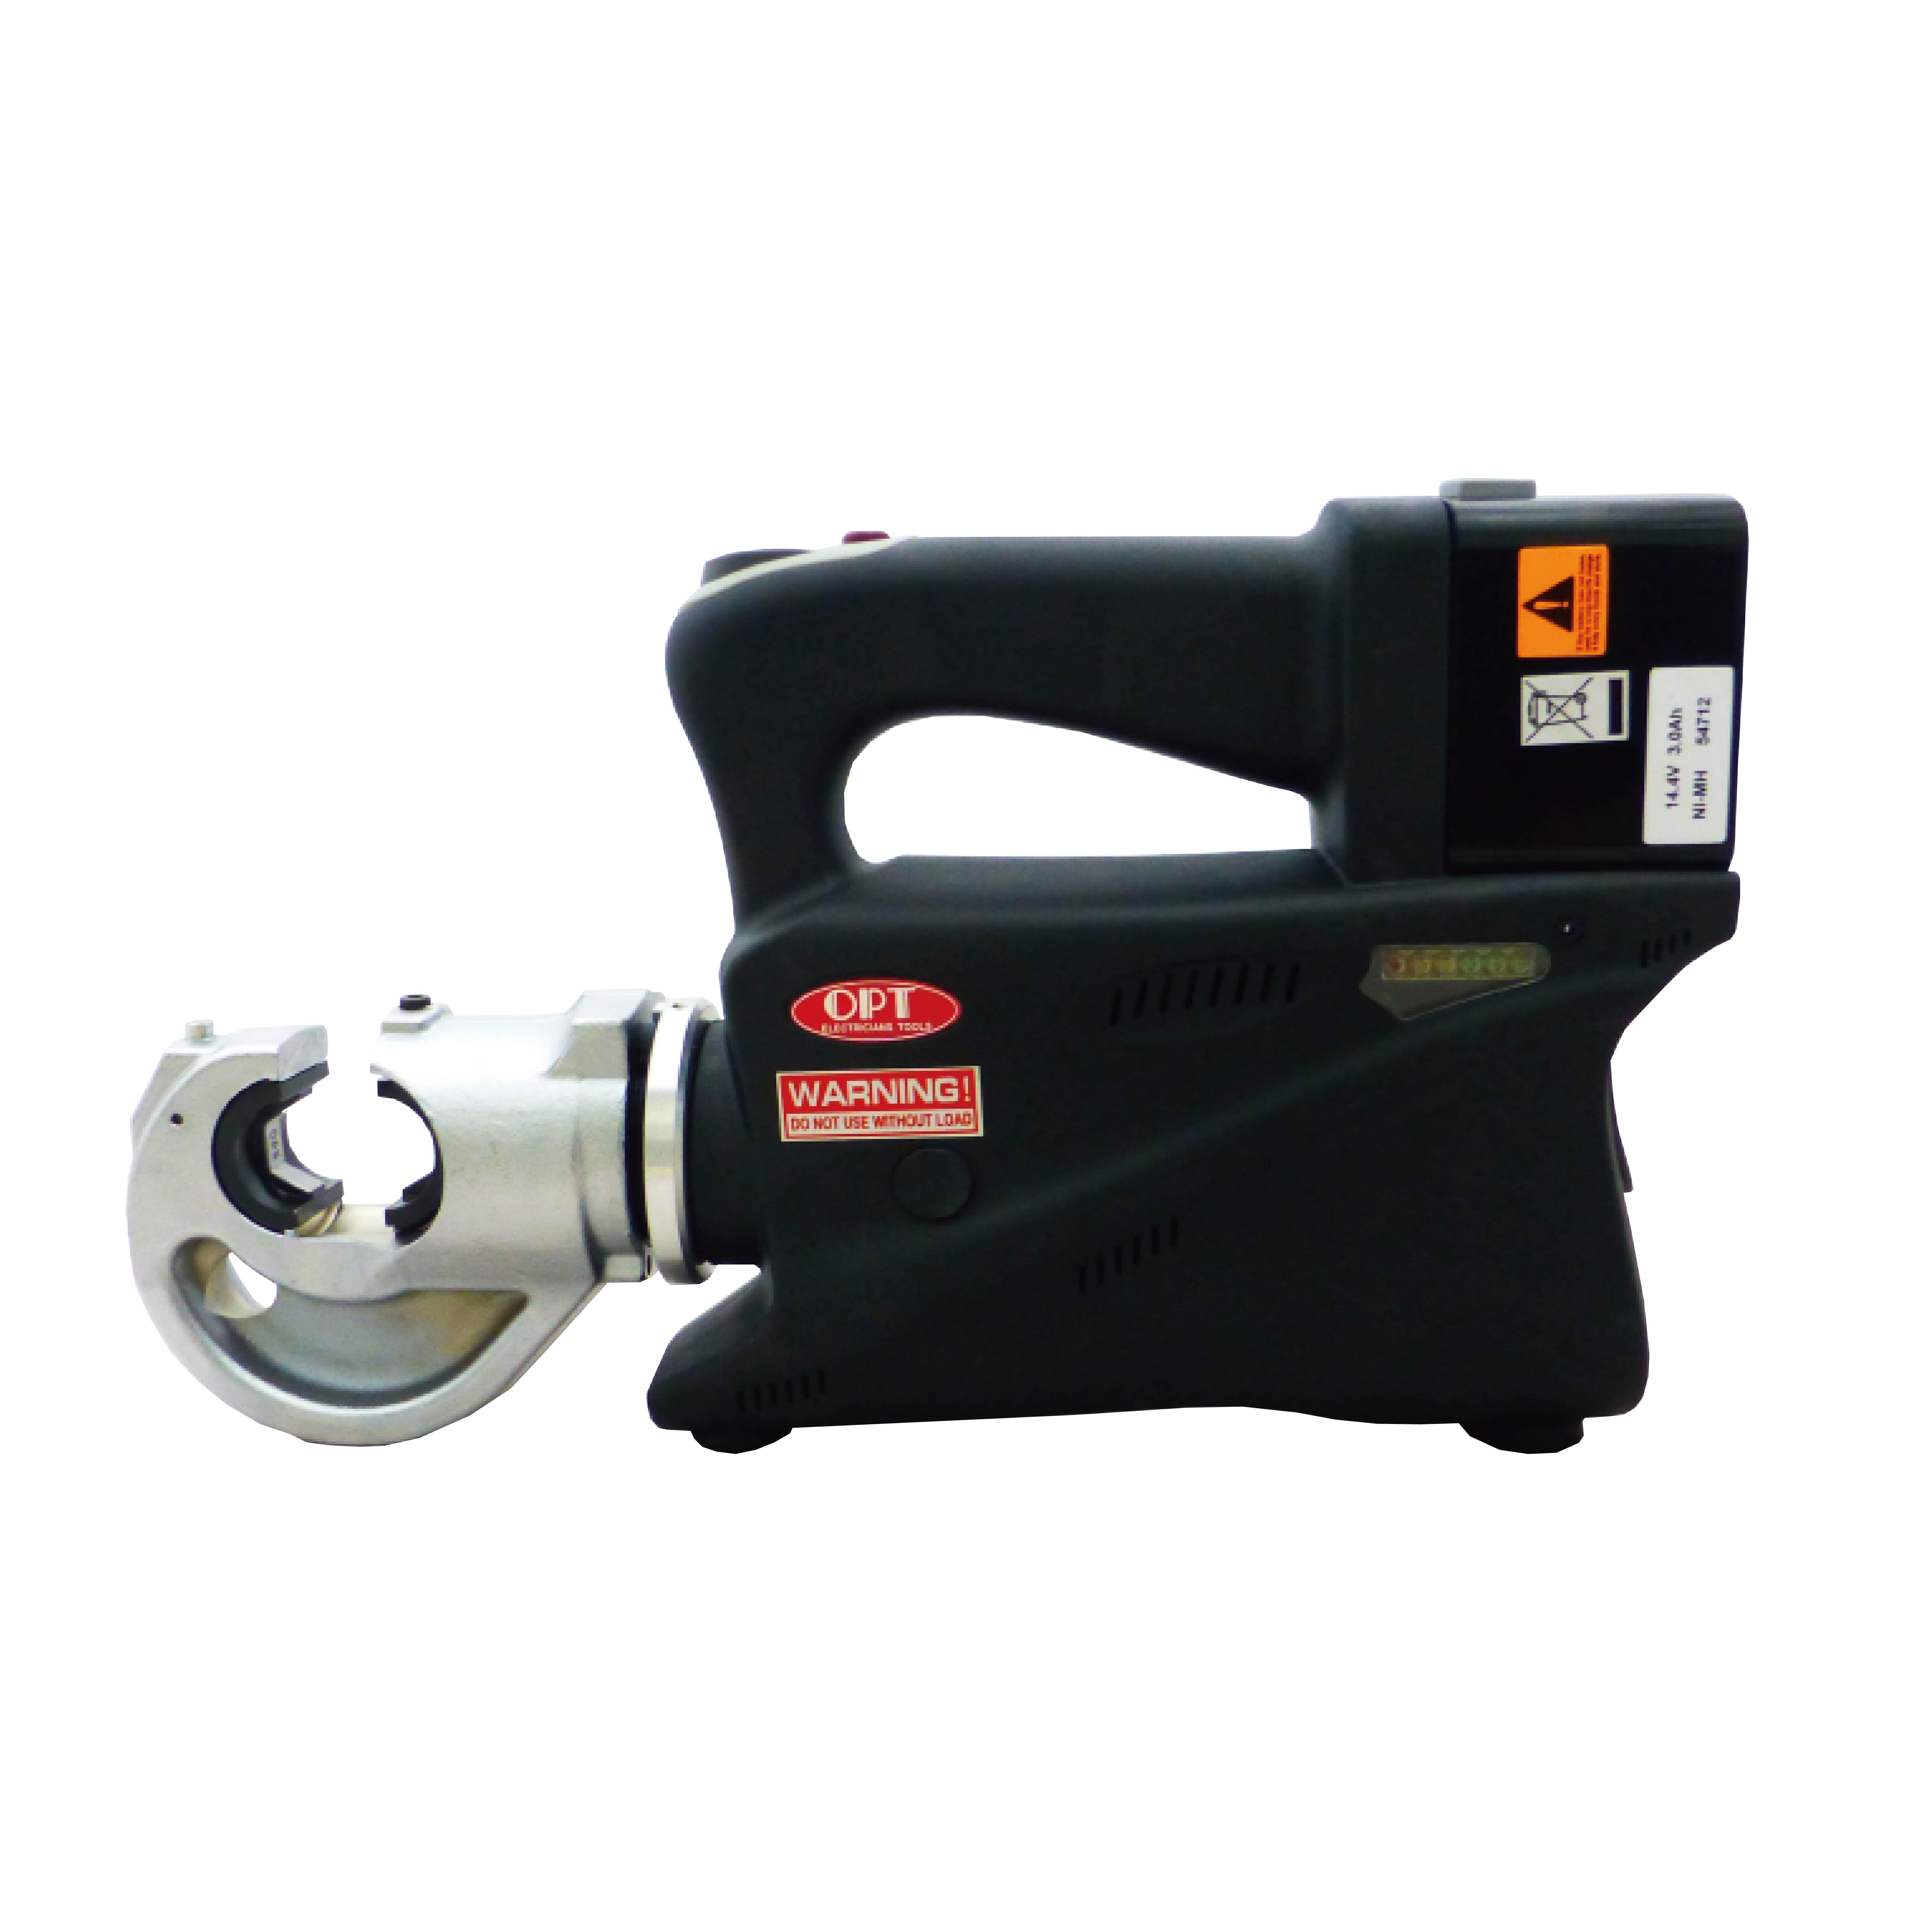 EPL-250 CORDLESS HYDRAULIC CRIMPING TOOLS-EPL-250